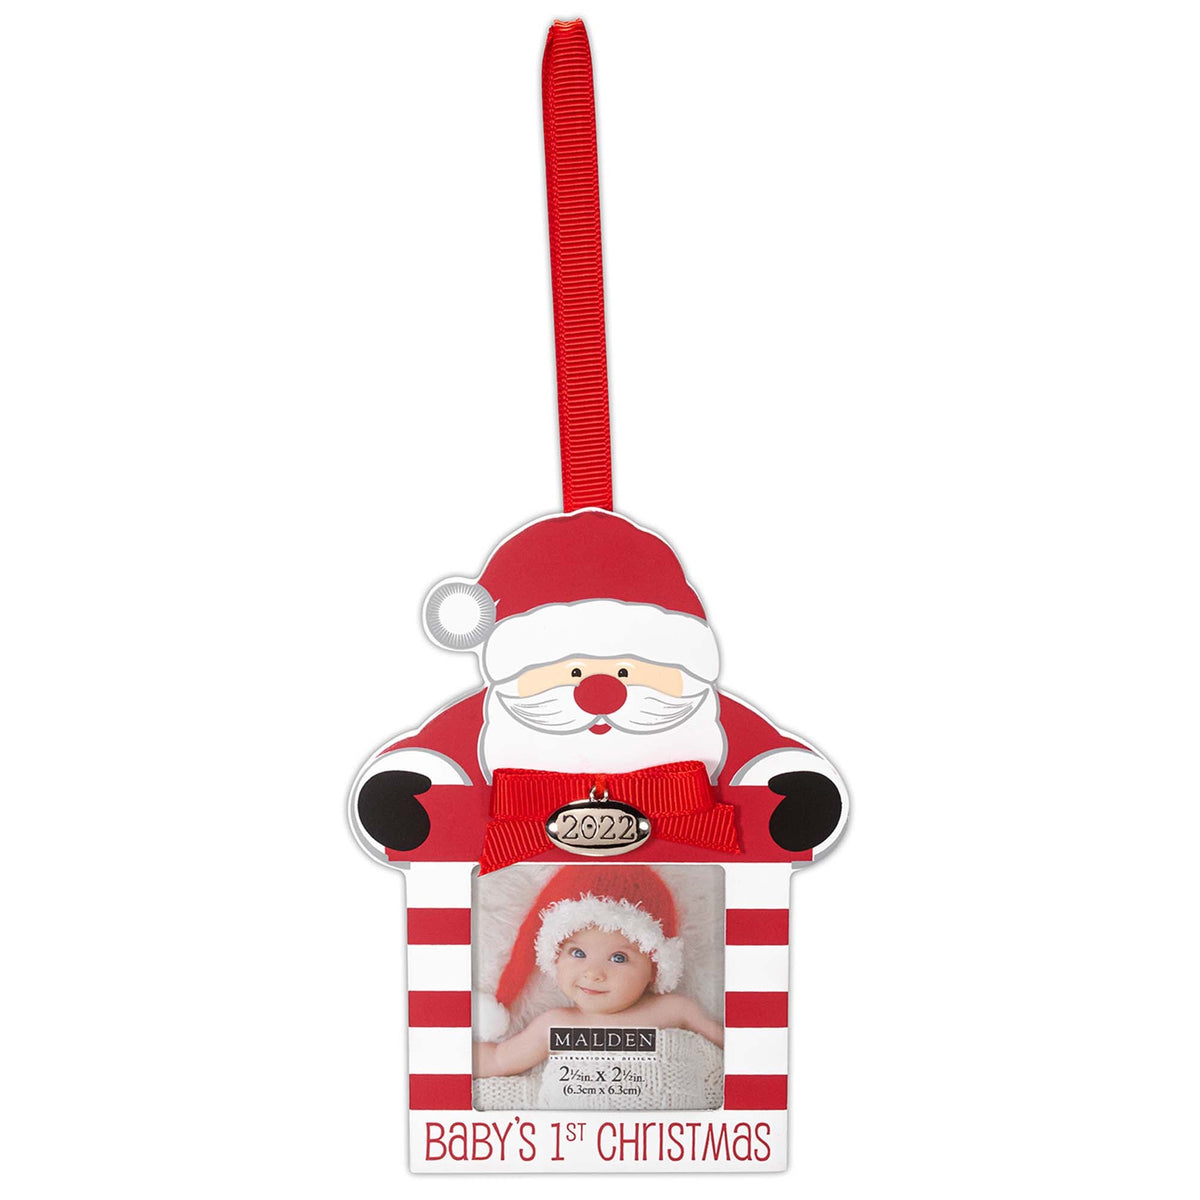 Malden International Design Christmas Baby's 1st Christmas Ornament, 2,5 x 2,5 Inches, 1 Count 096287178785